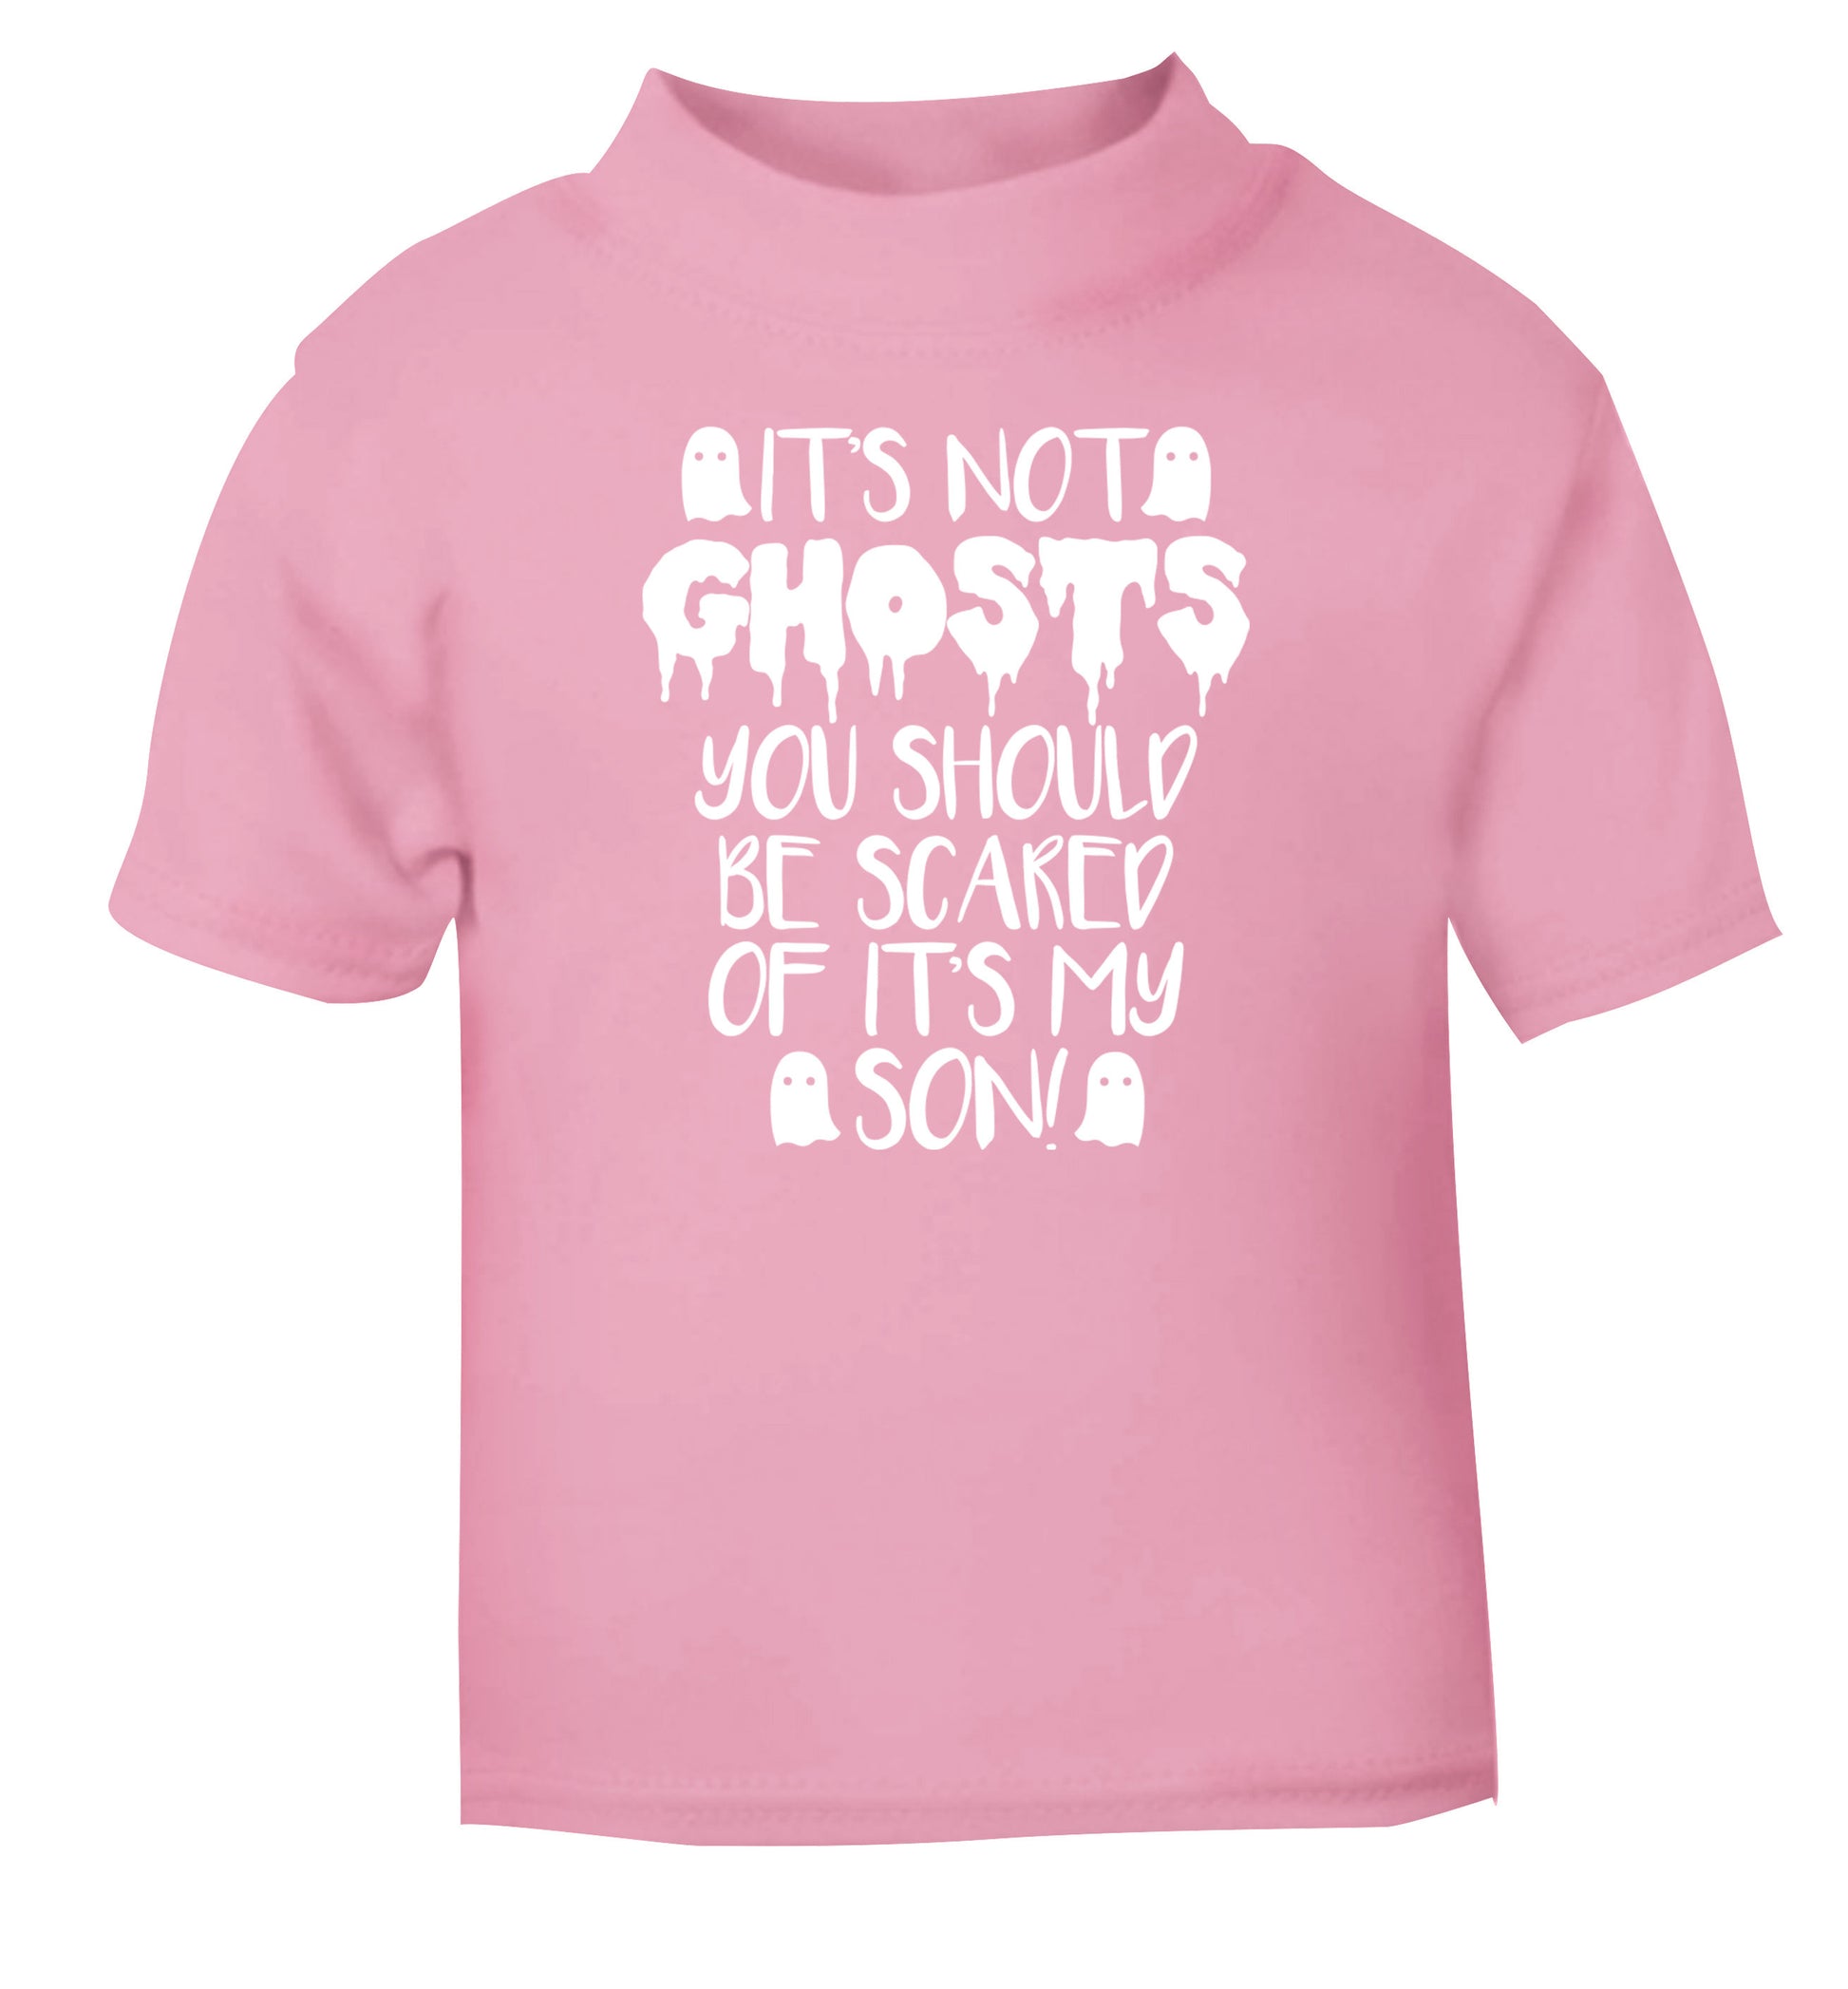 It's not ghosts you should be scared of it's my son! light pink Baby Toddler Tshirt 2 Years